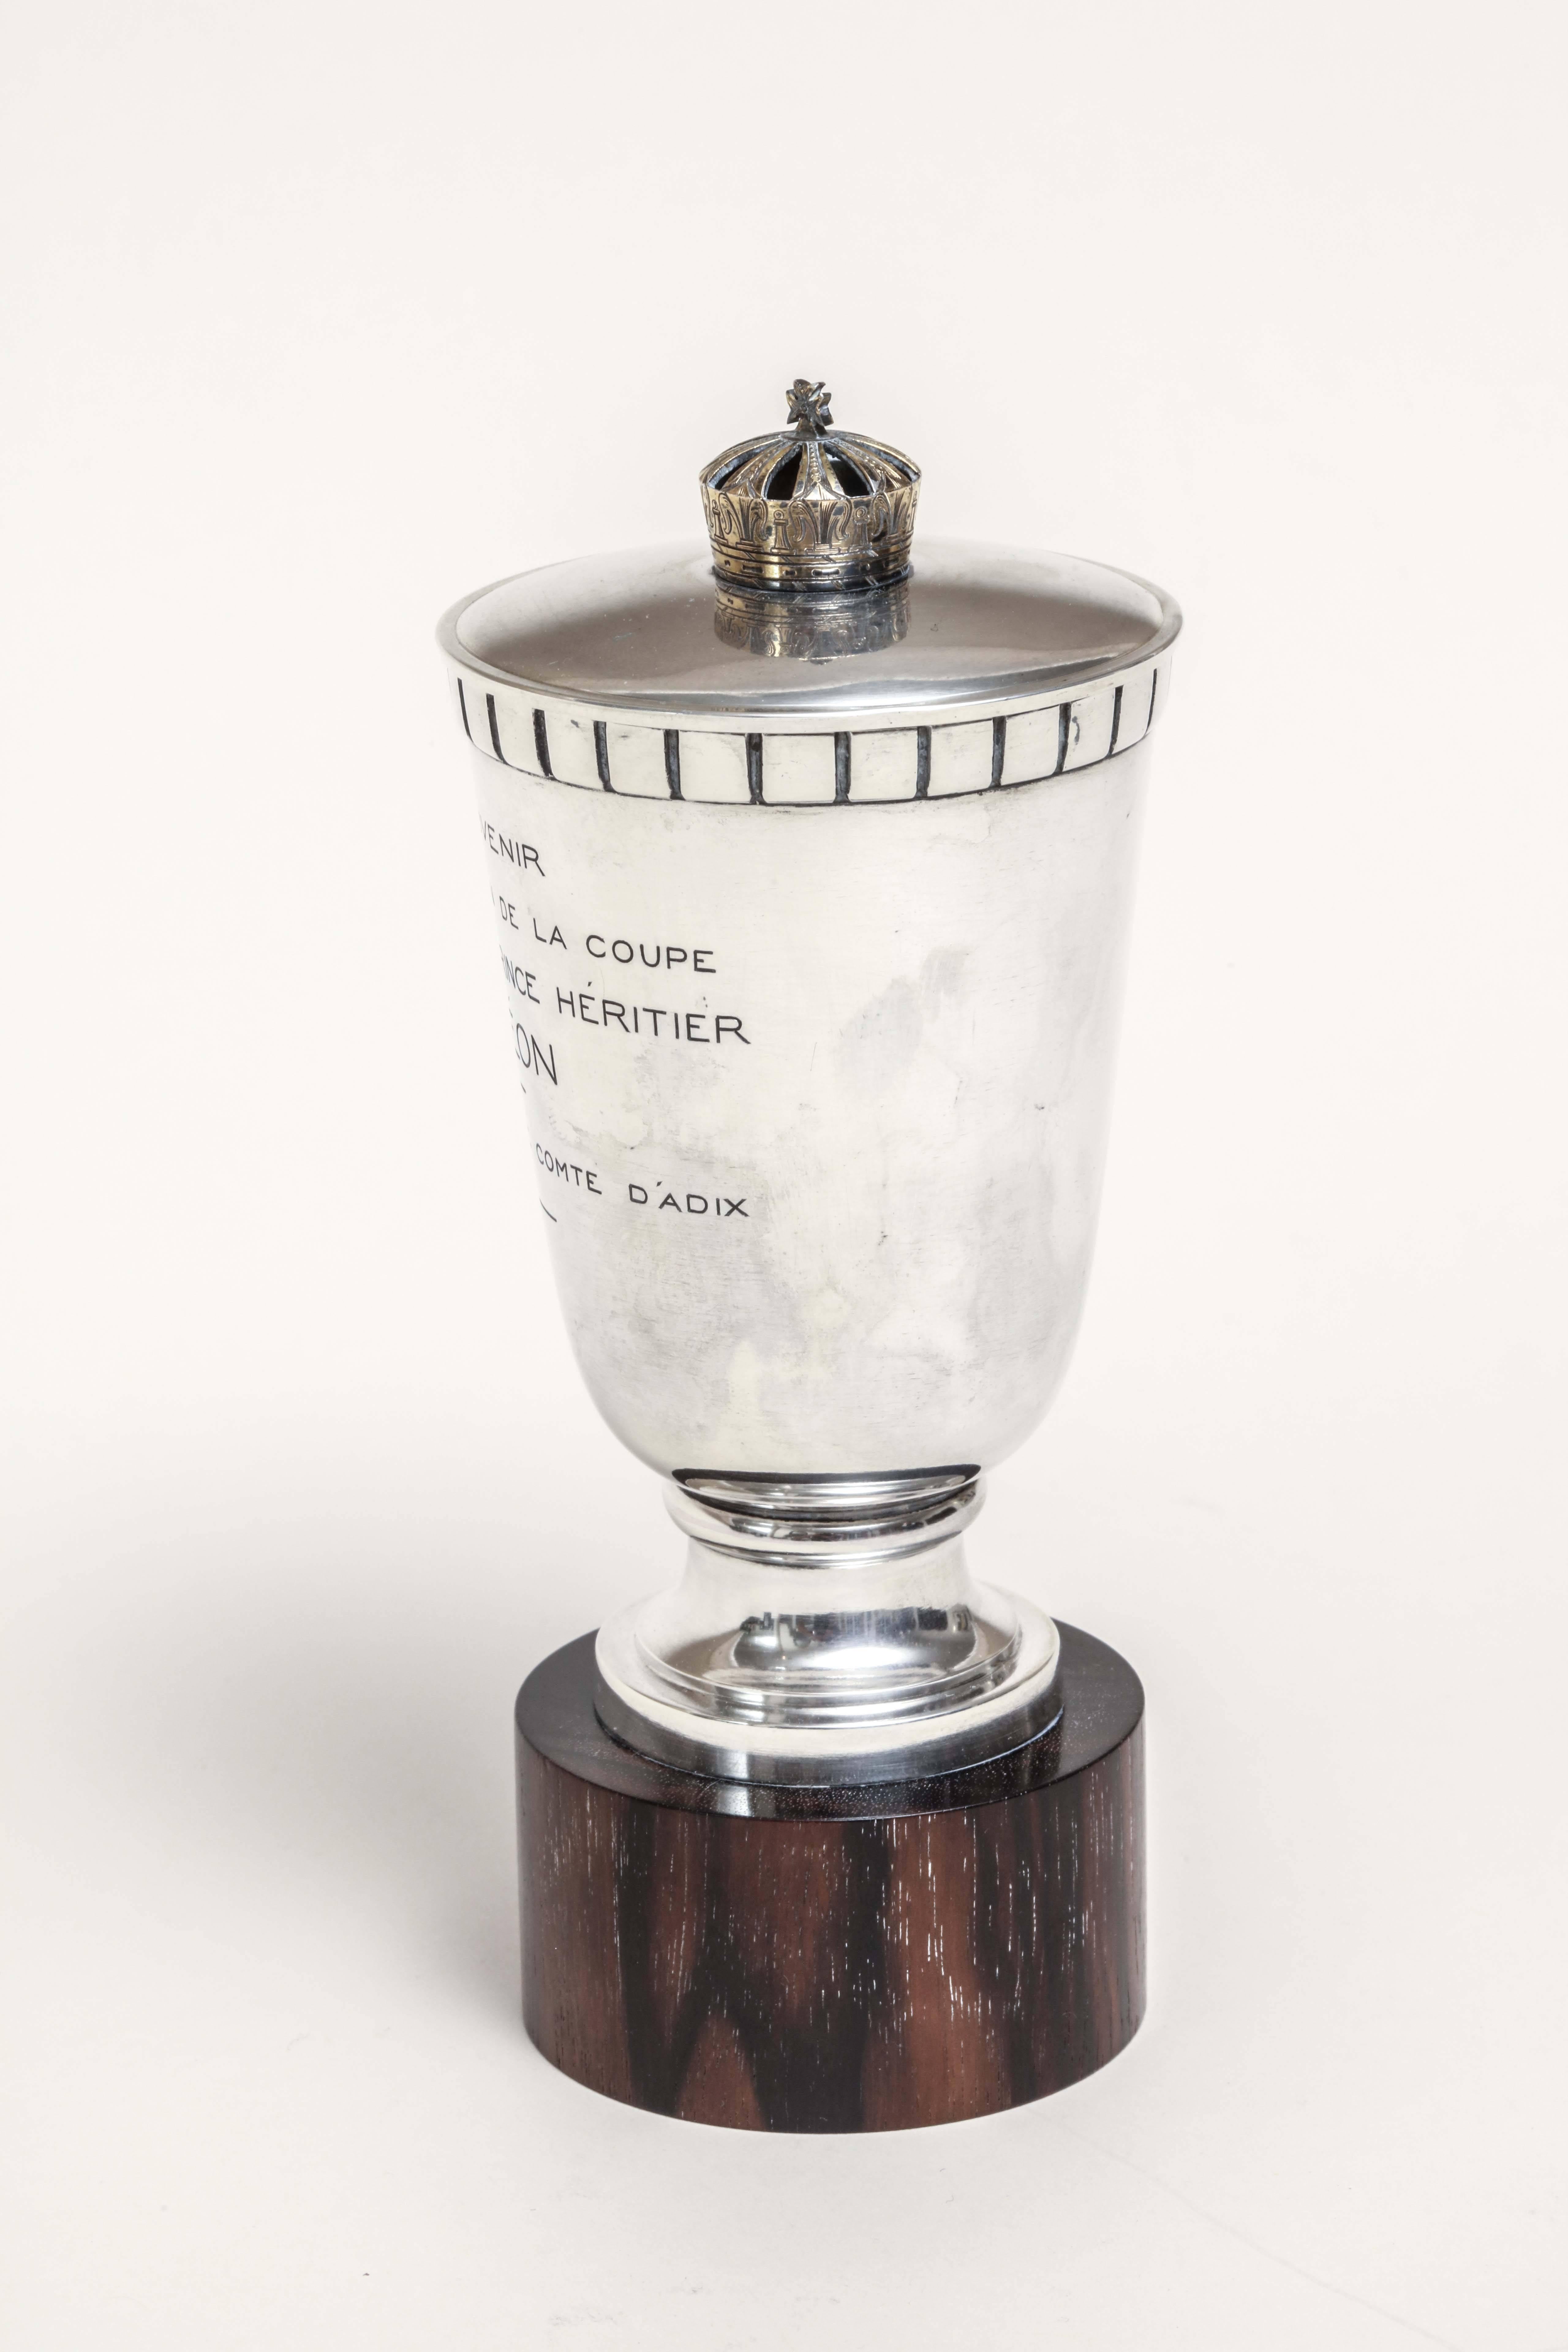 Sterling silver trophy mounted on ebony base with silver top and gilded finial. Has some engraving, including Prince Heritier Simeon.
Impressed with Minerve for 950 silver/ Jacque and Pierre Cardeilhac poincon/ Cardeilhac Paris.

Measures: 5 7/8”